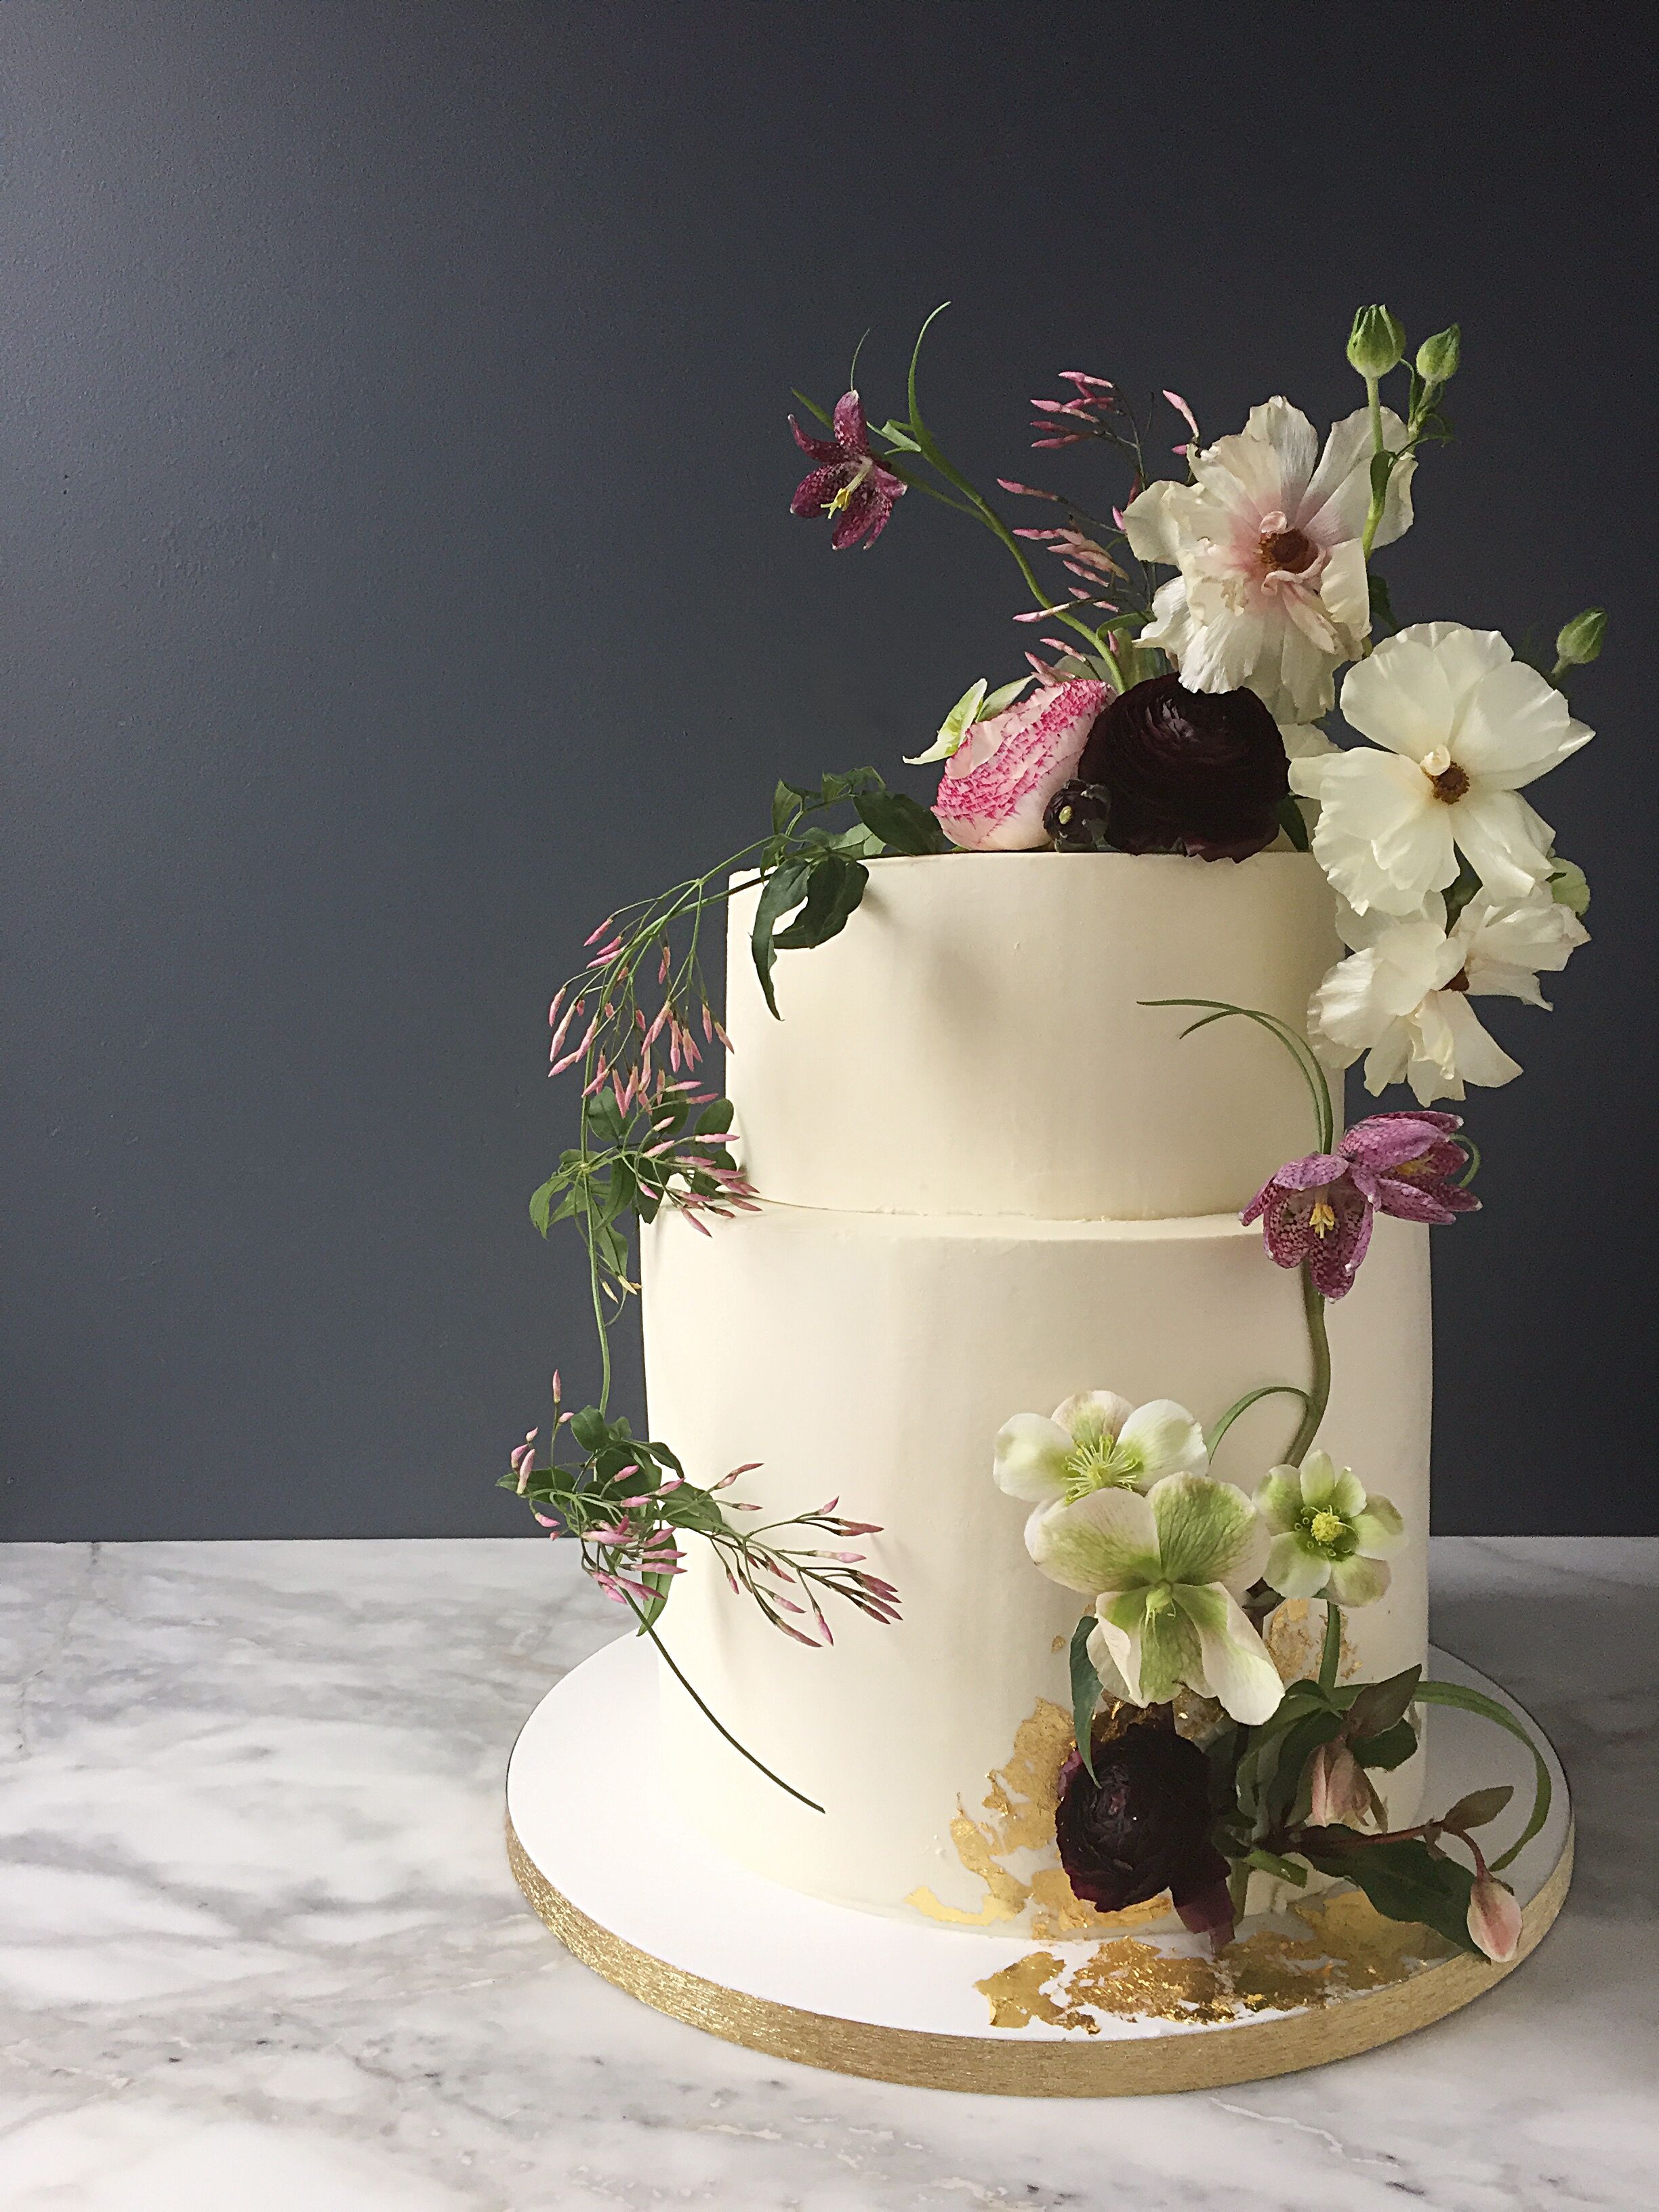 Wedding Cake Bakeries In New York Ny The Knot